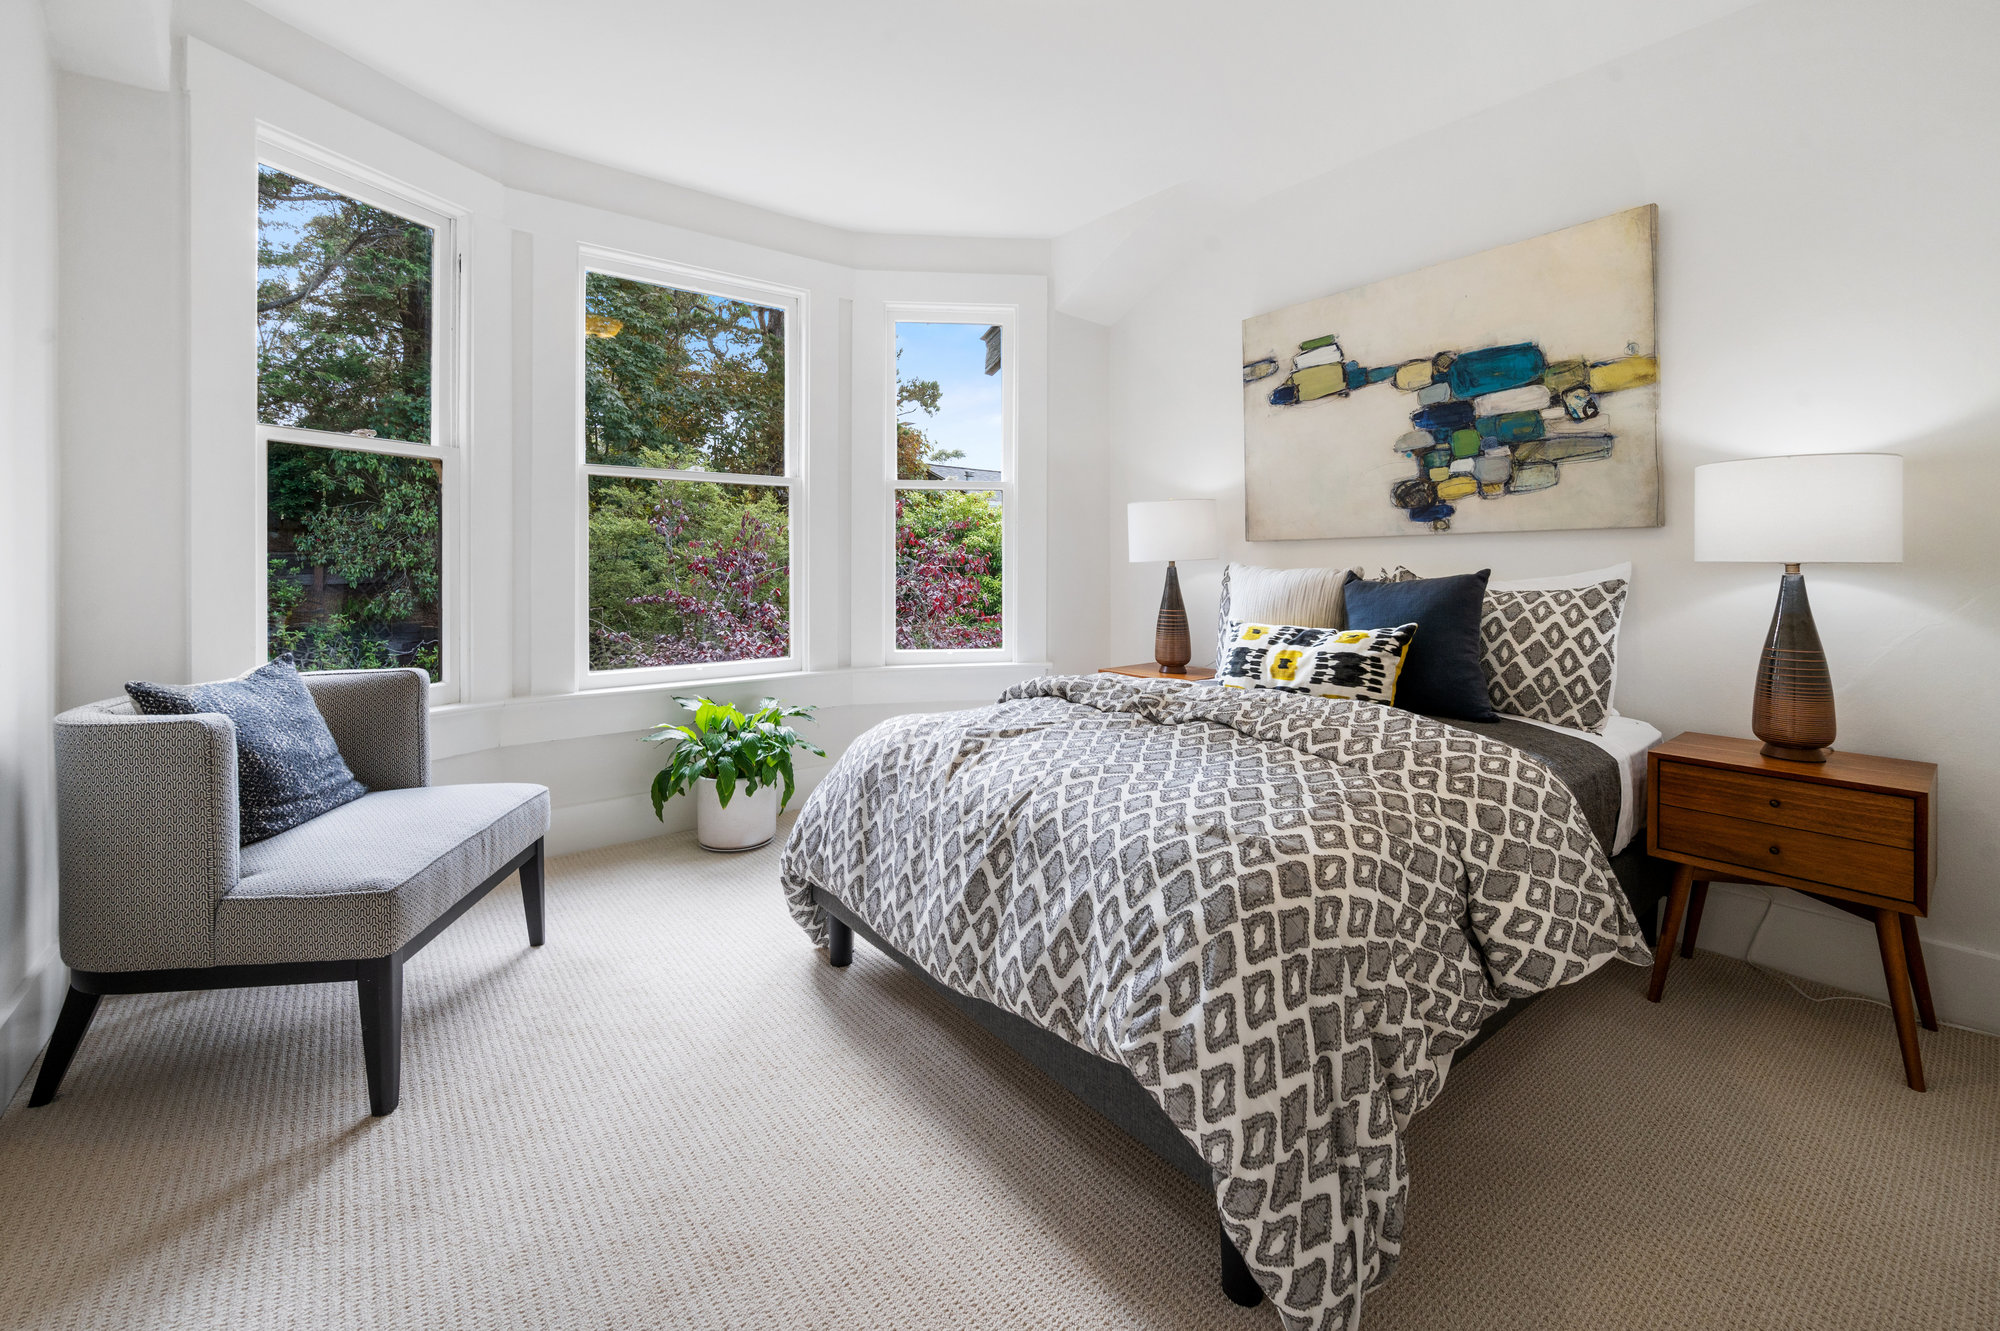 Property Photo: Bedroom three, showing a large bay window